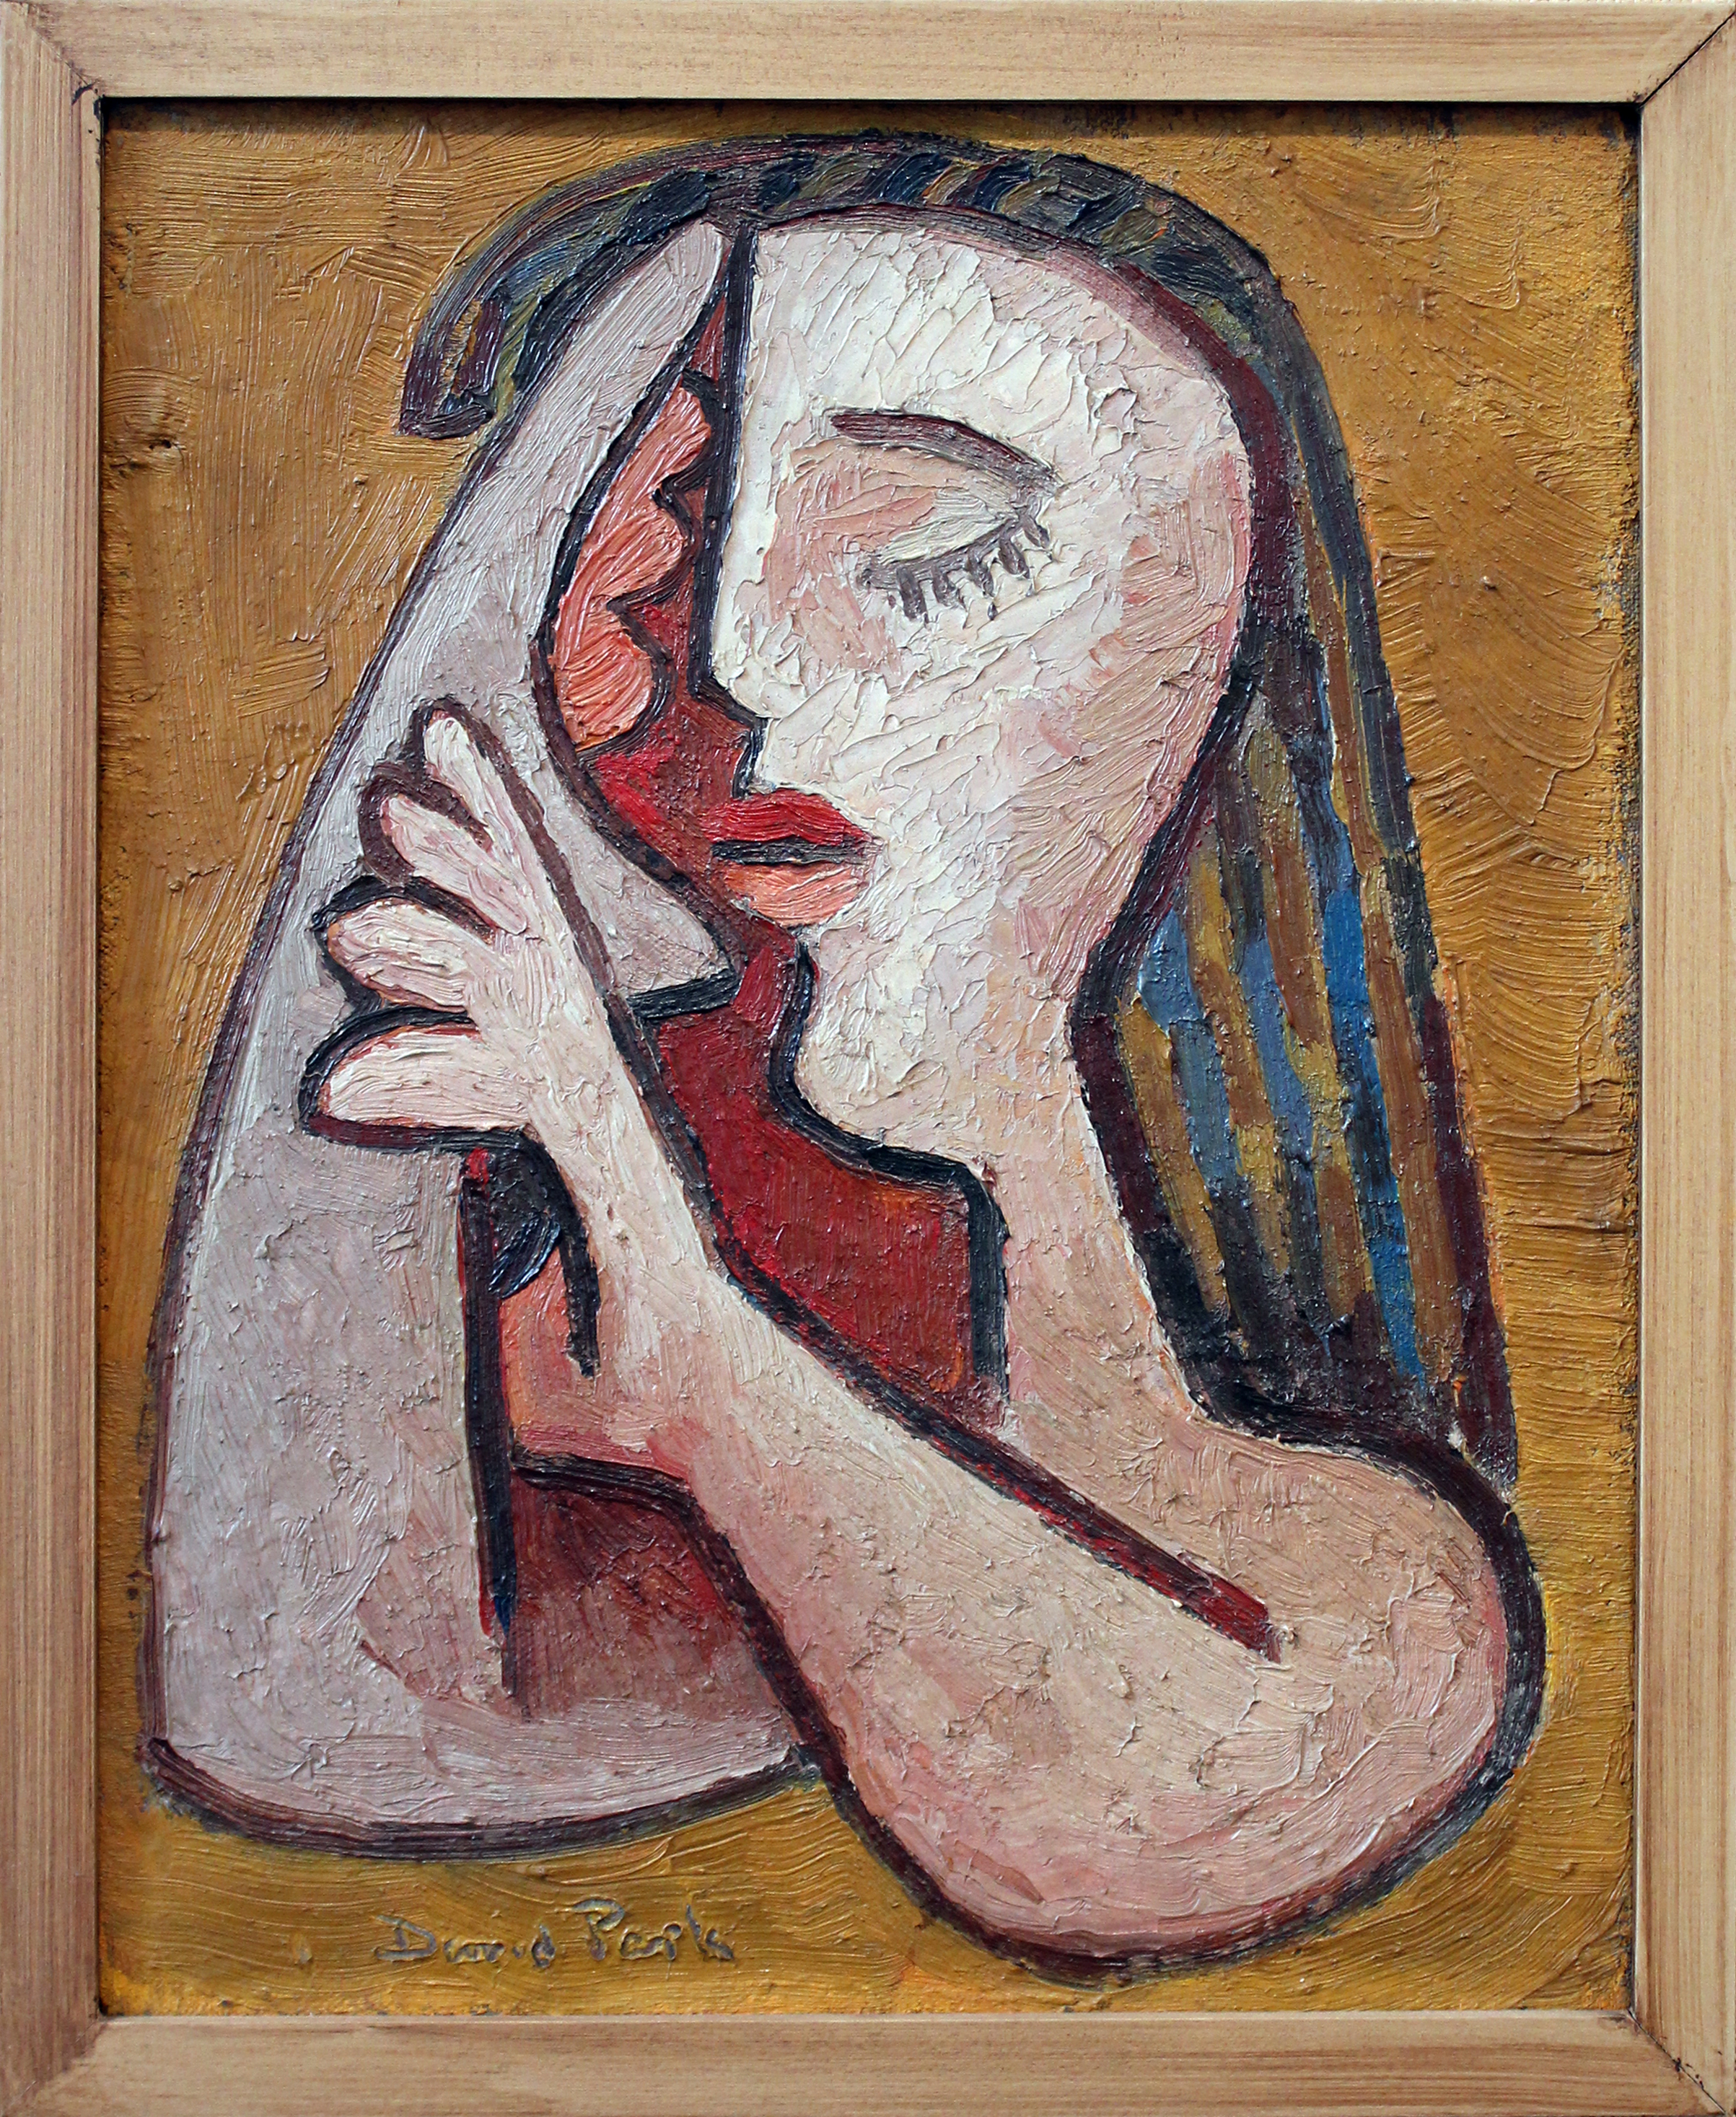 Painting of woman with hand on face and other hand on arm